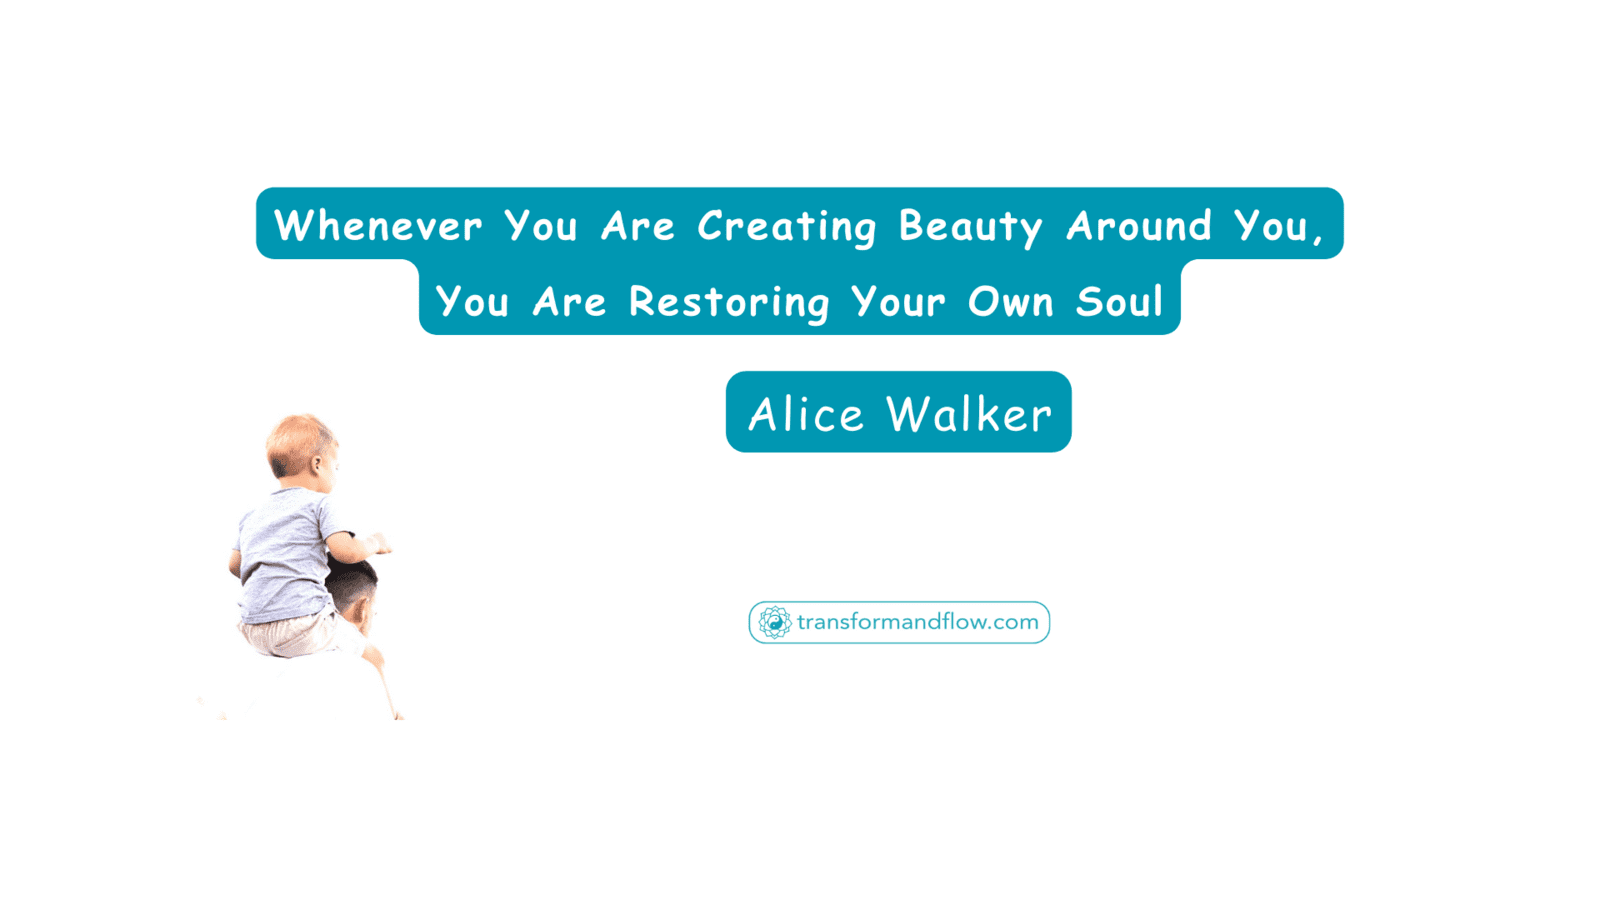 Whenever You Are Creating Beauty Around You, You Are Restoring Your Own Soul. Alice Walker